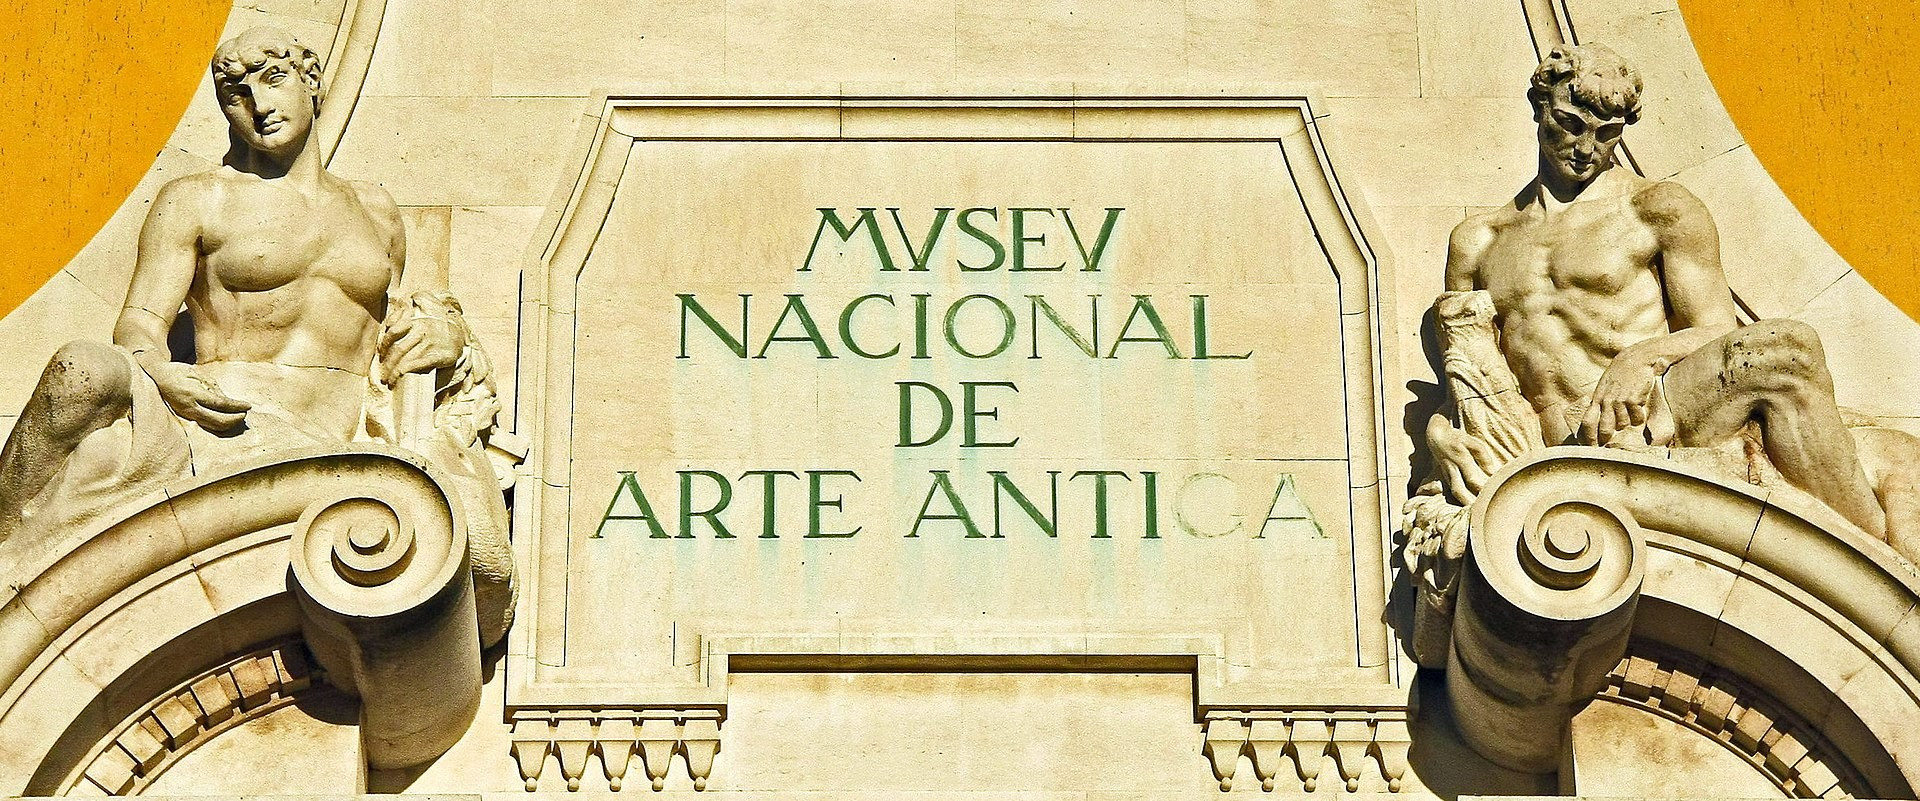 By Vitor Oliveira from Torres Vedras, PORTUGAL - Museu Nacional de Arte Antiga - Lisboa - Portugal, CC BY-SA 2.0, https://commons.wikimedia.org/w/index.php?curid=79195547